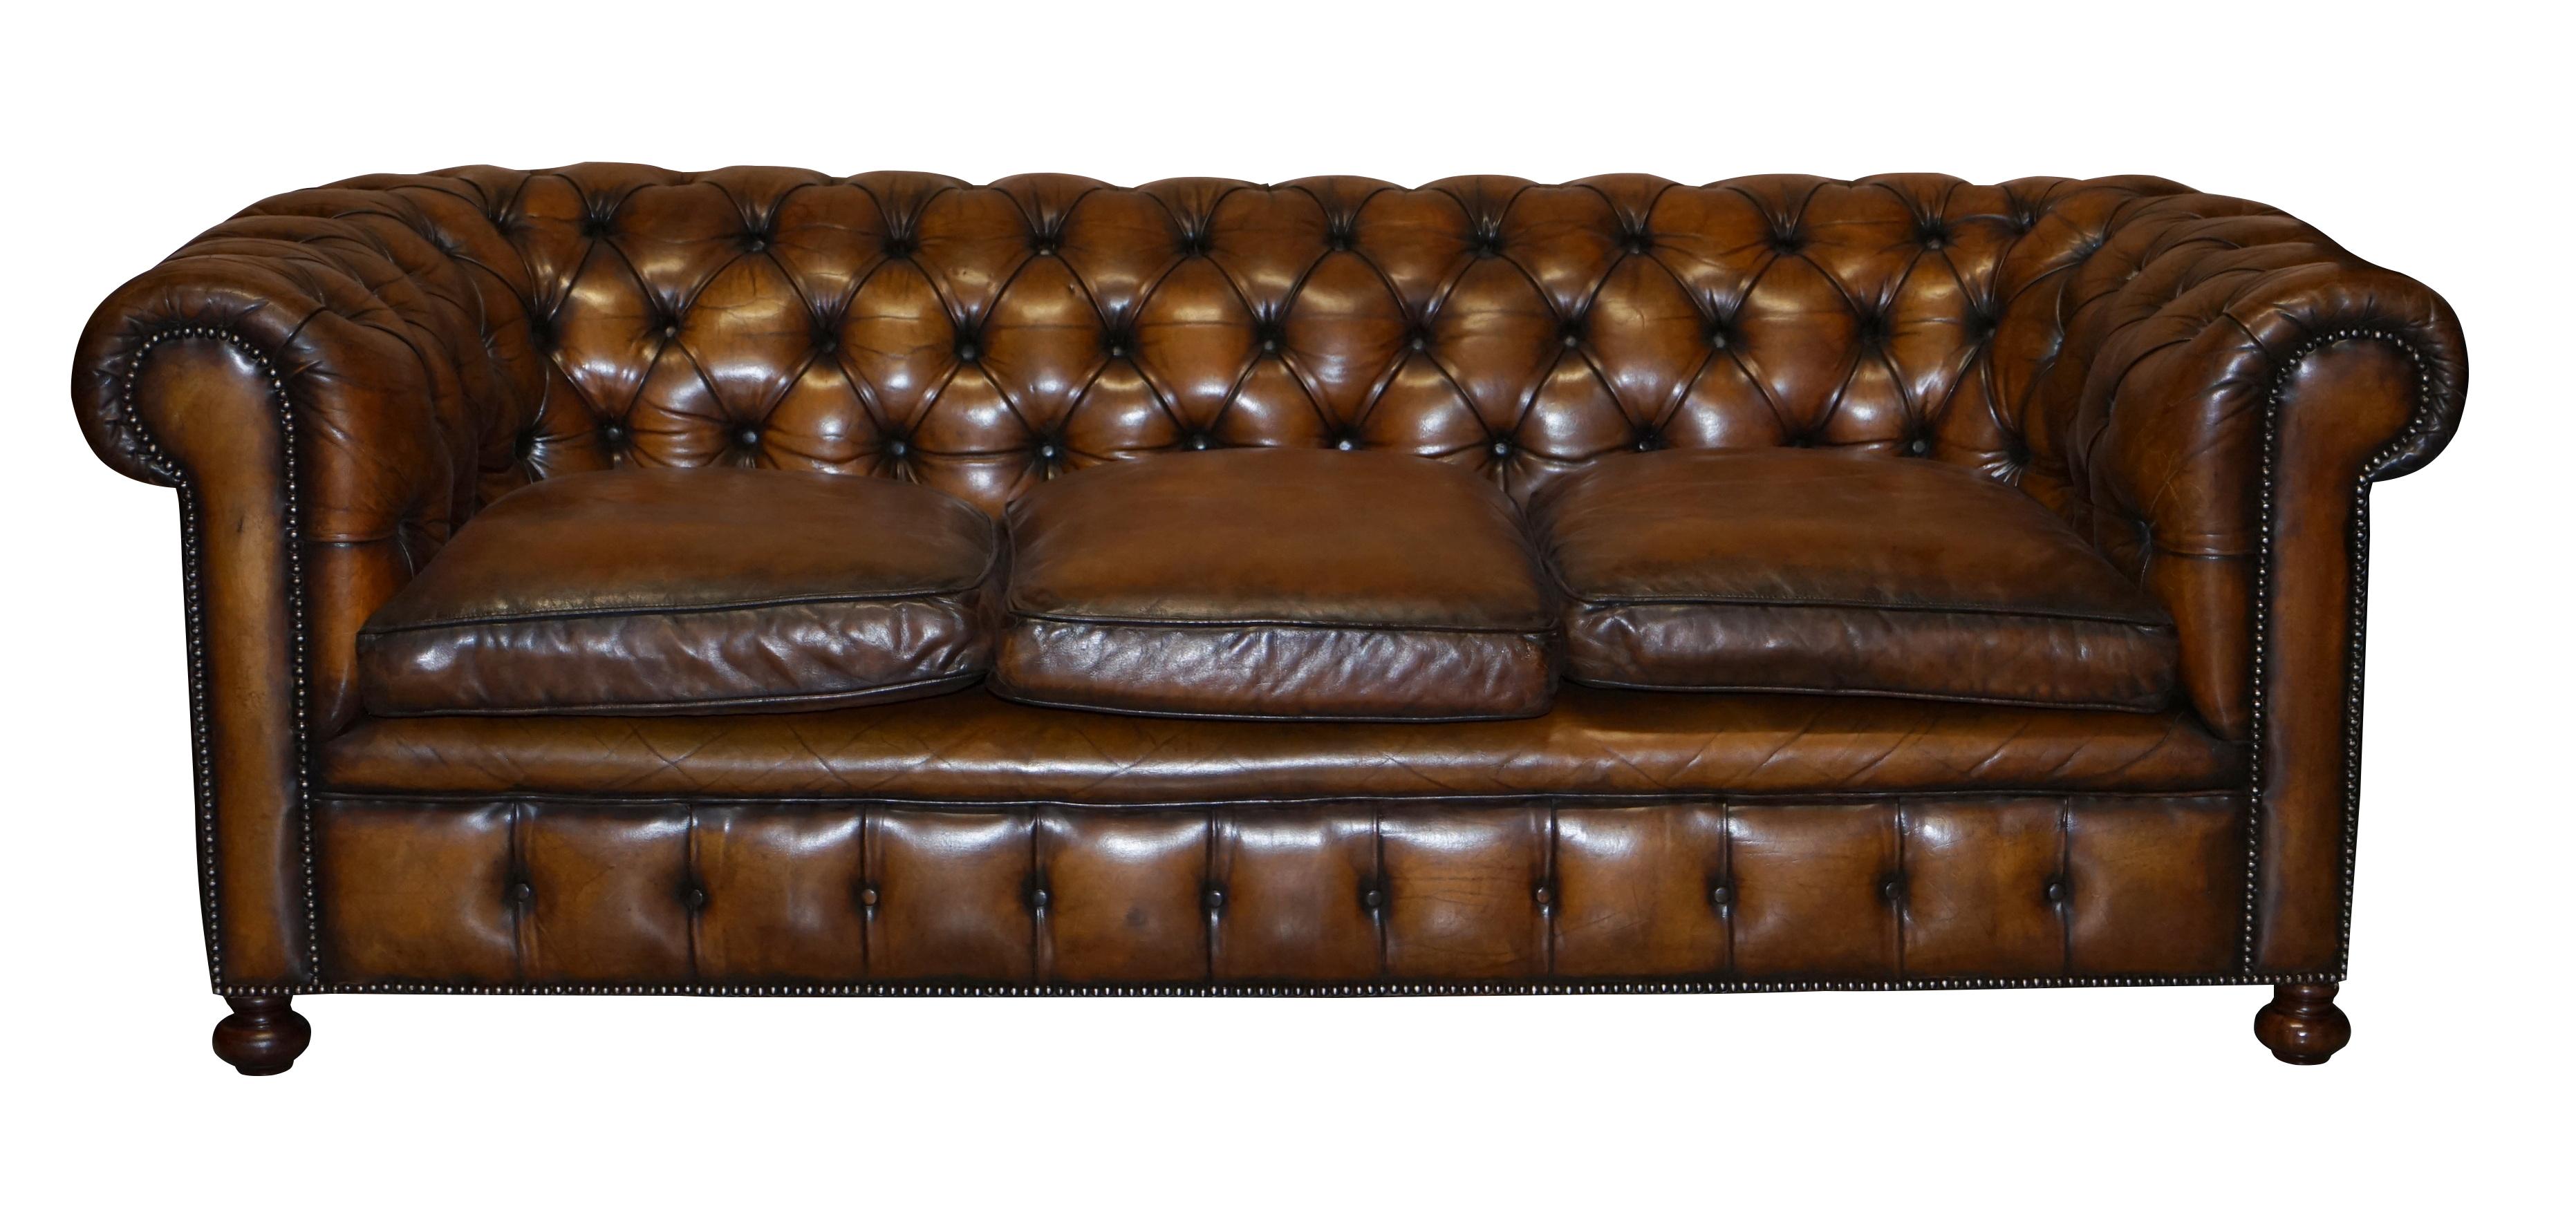 We are delighted to offer for sale this exceptionally rare original 1960’s Cigar brown leather Chesterfield club sofa in restored condition with feather filled cushions 

This is a very rare find, you almost never come across mid 20th century